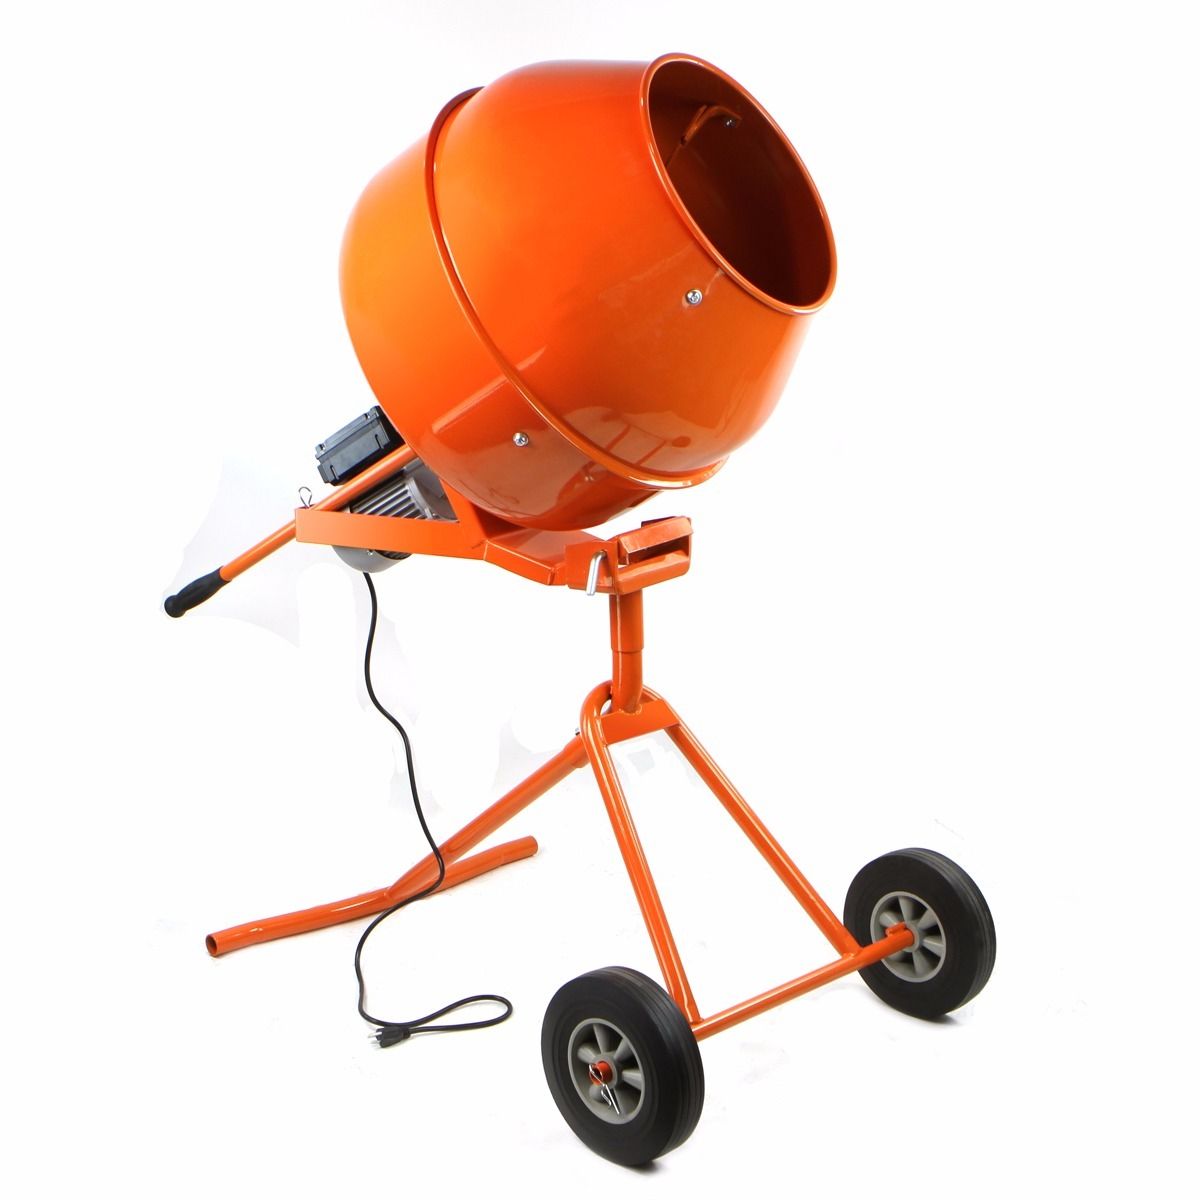 CONCRETE MIXER / CEMENT MIXER 8 Cu ft TRI STAND ROTARY TYPE – Build